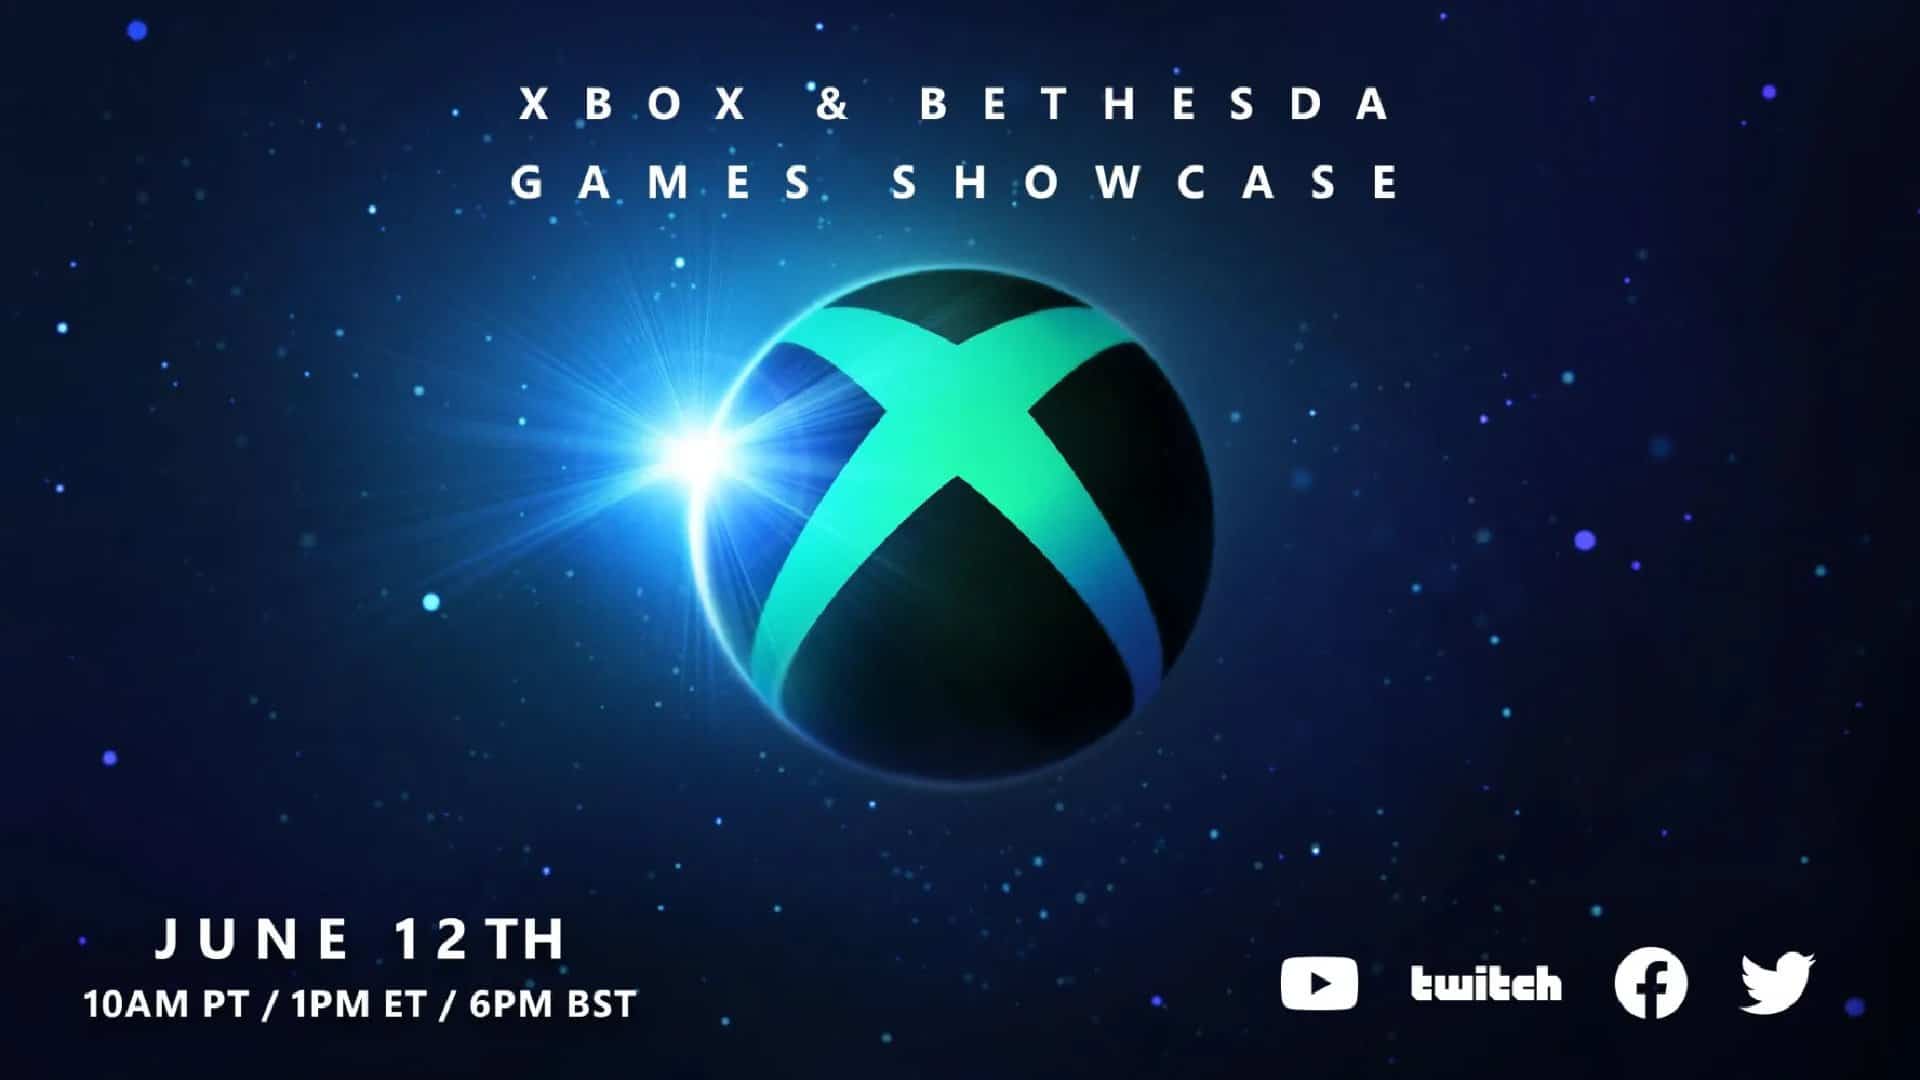 Xbox Games Showcase Extended will feature “new trailers”